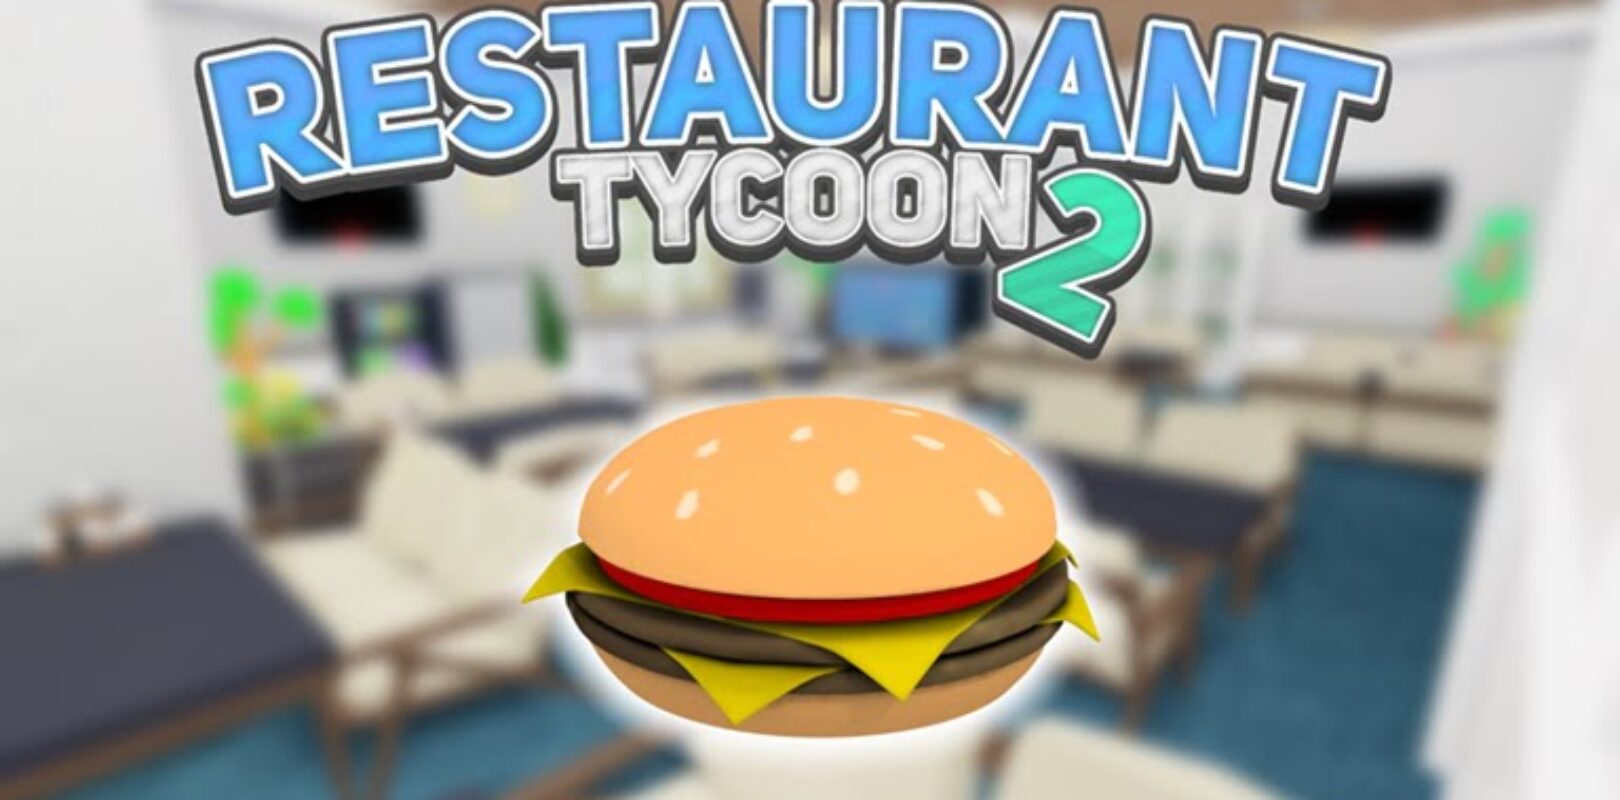 Restaurant Tycoon 2 Codes 2020 Pivotal Gamers - creating the best restaurant ever roblox restaurant tycoon youtube